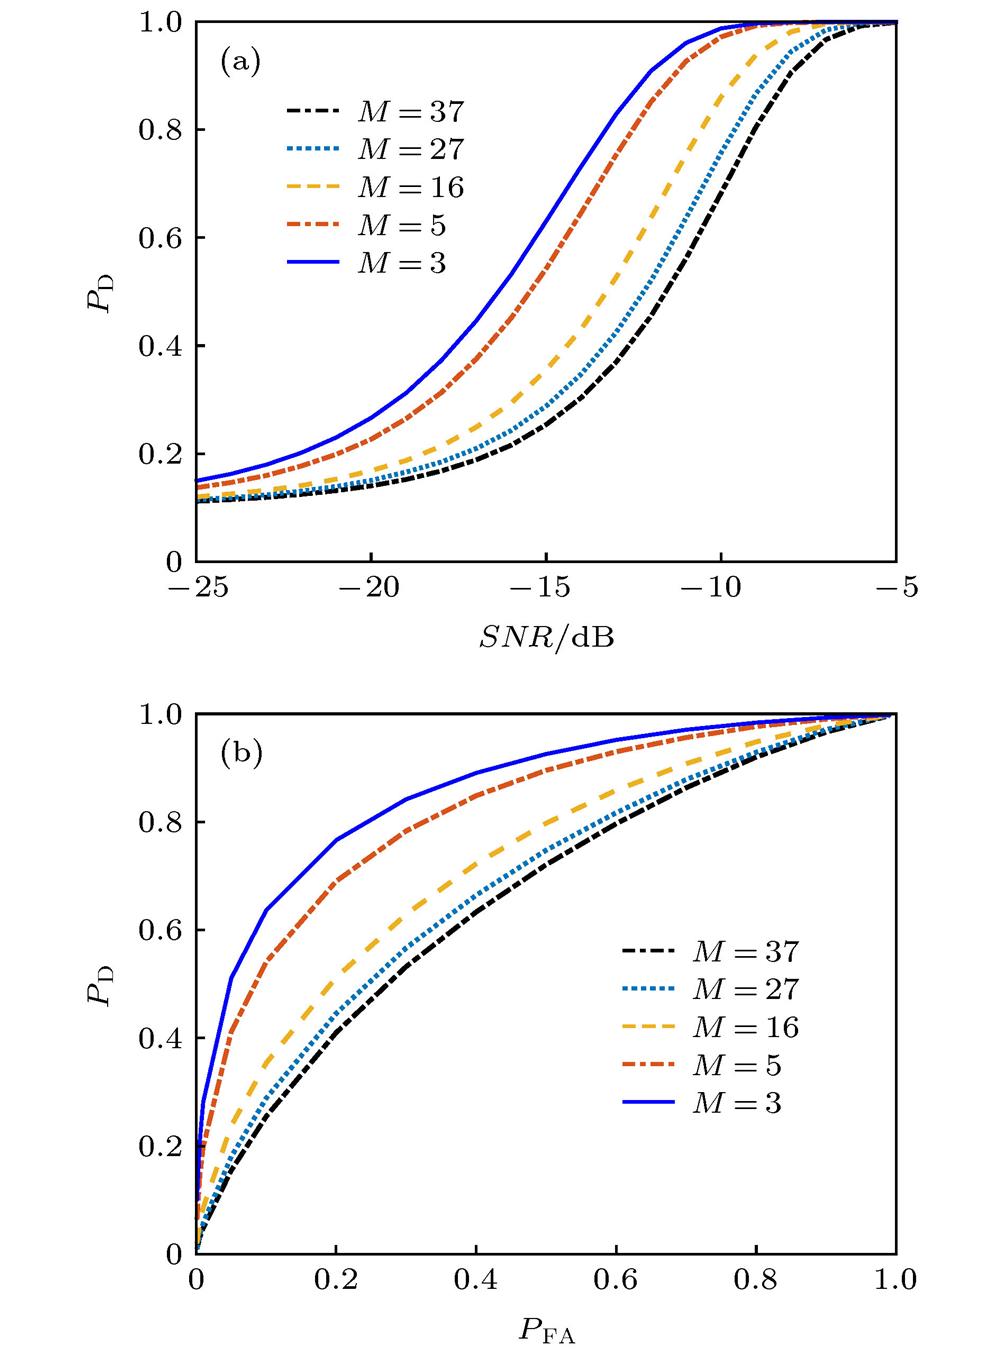 Detection performance curves of the MSD under various numbers of normal modes: (a) Probabilities of detection versus SNRs, ; (b) probabilities of detection versus probabilities of false alarm, .